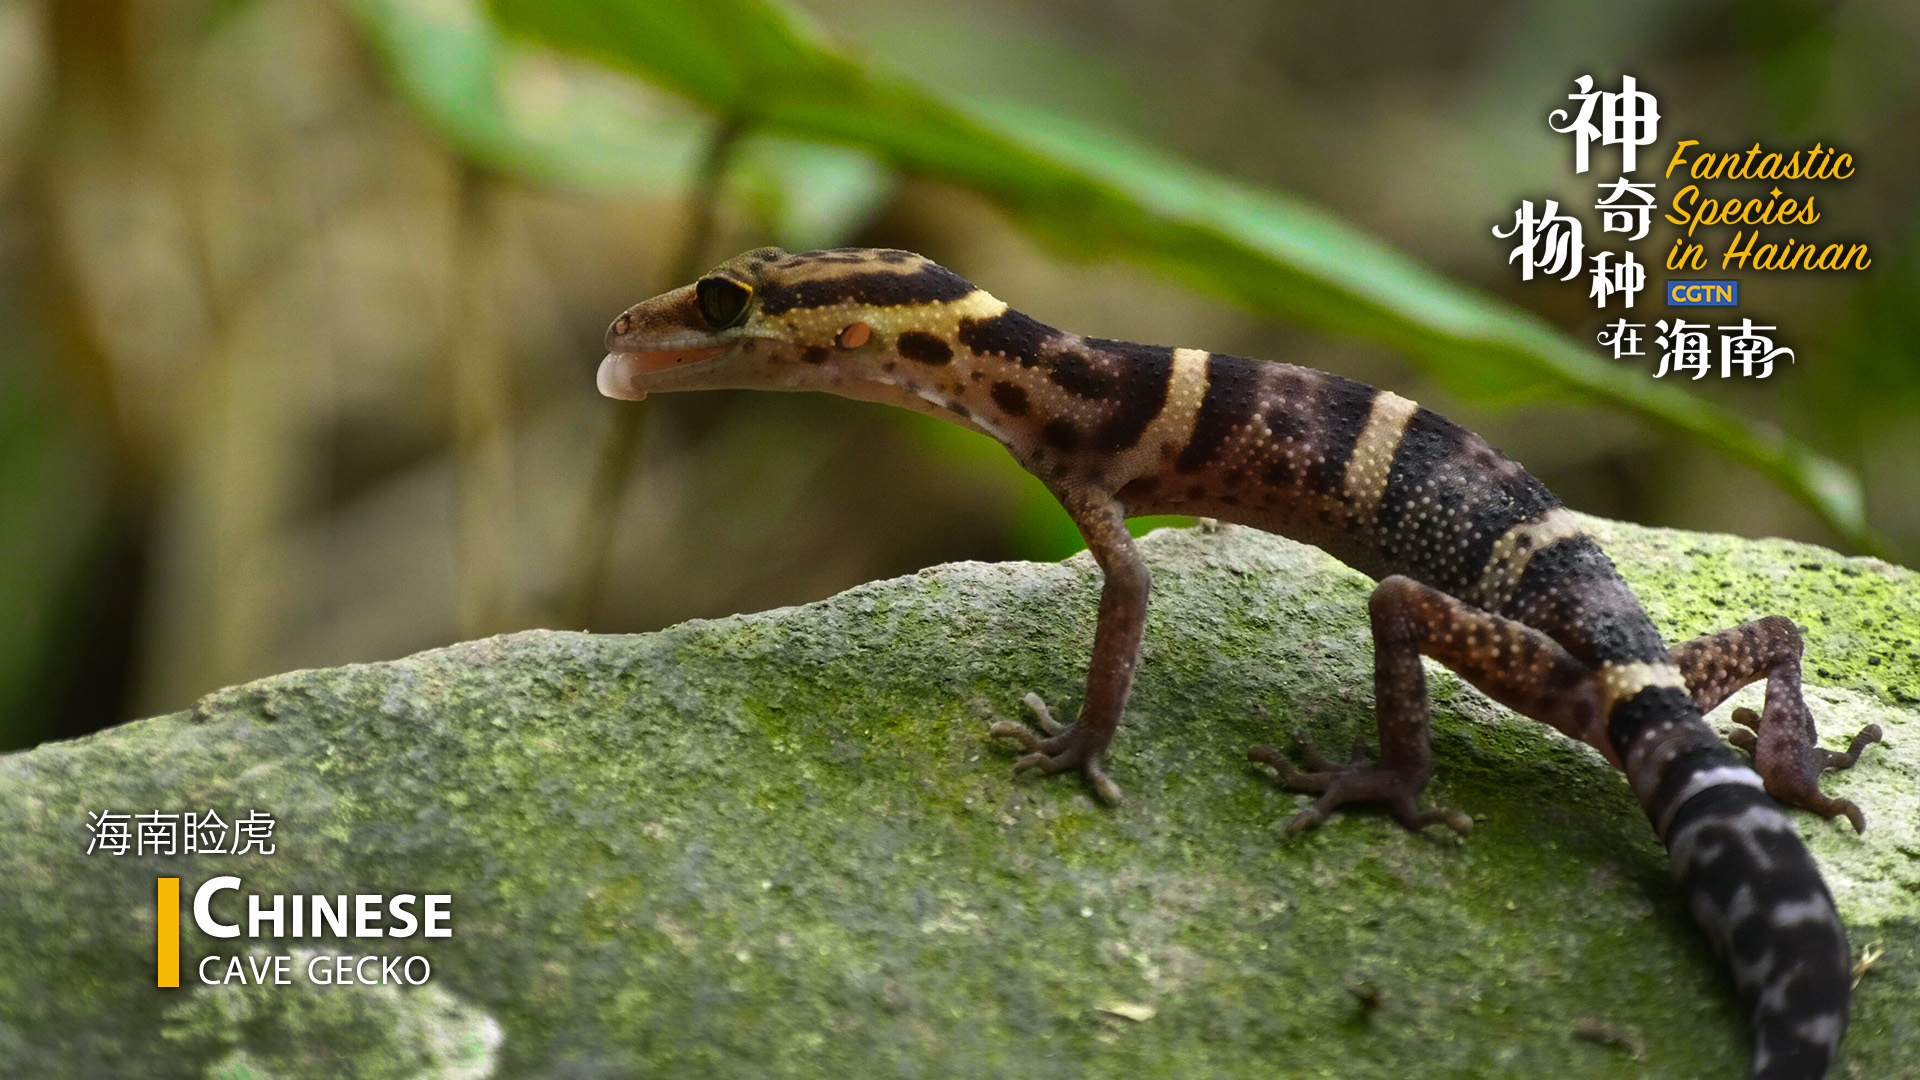 Fantastic Species in Hainan: Find Chinese cave geckos in rock crevices